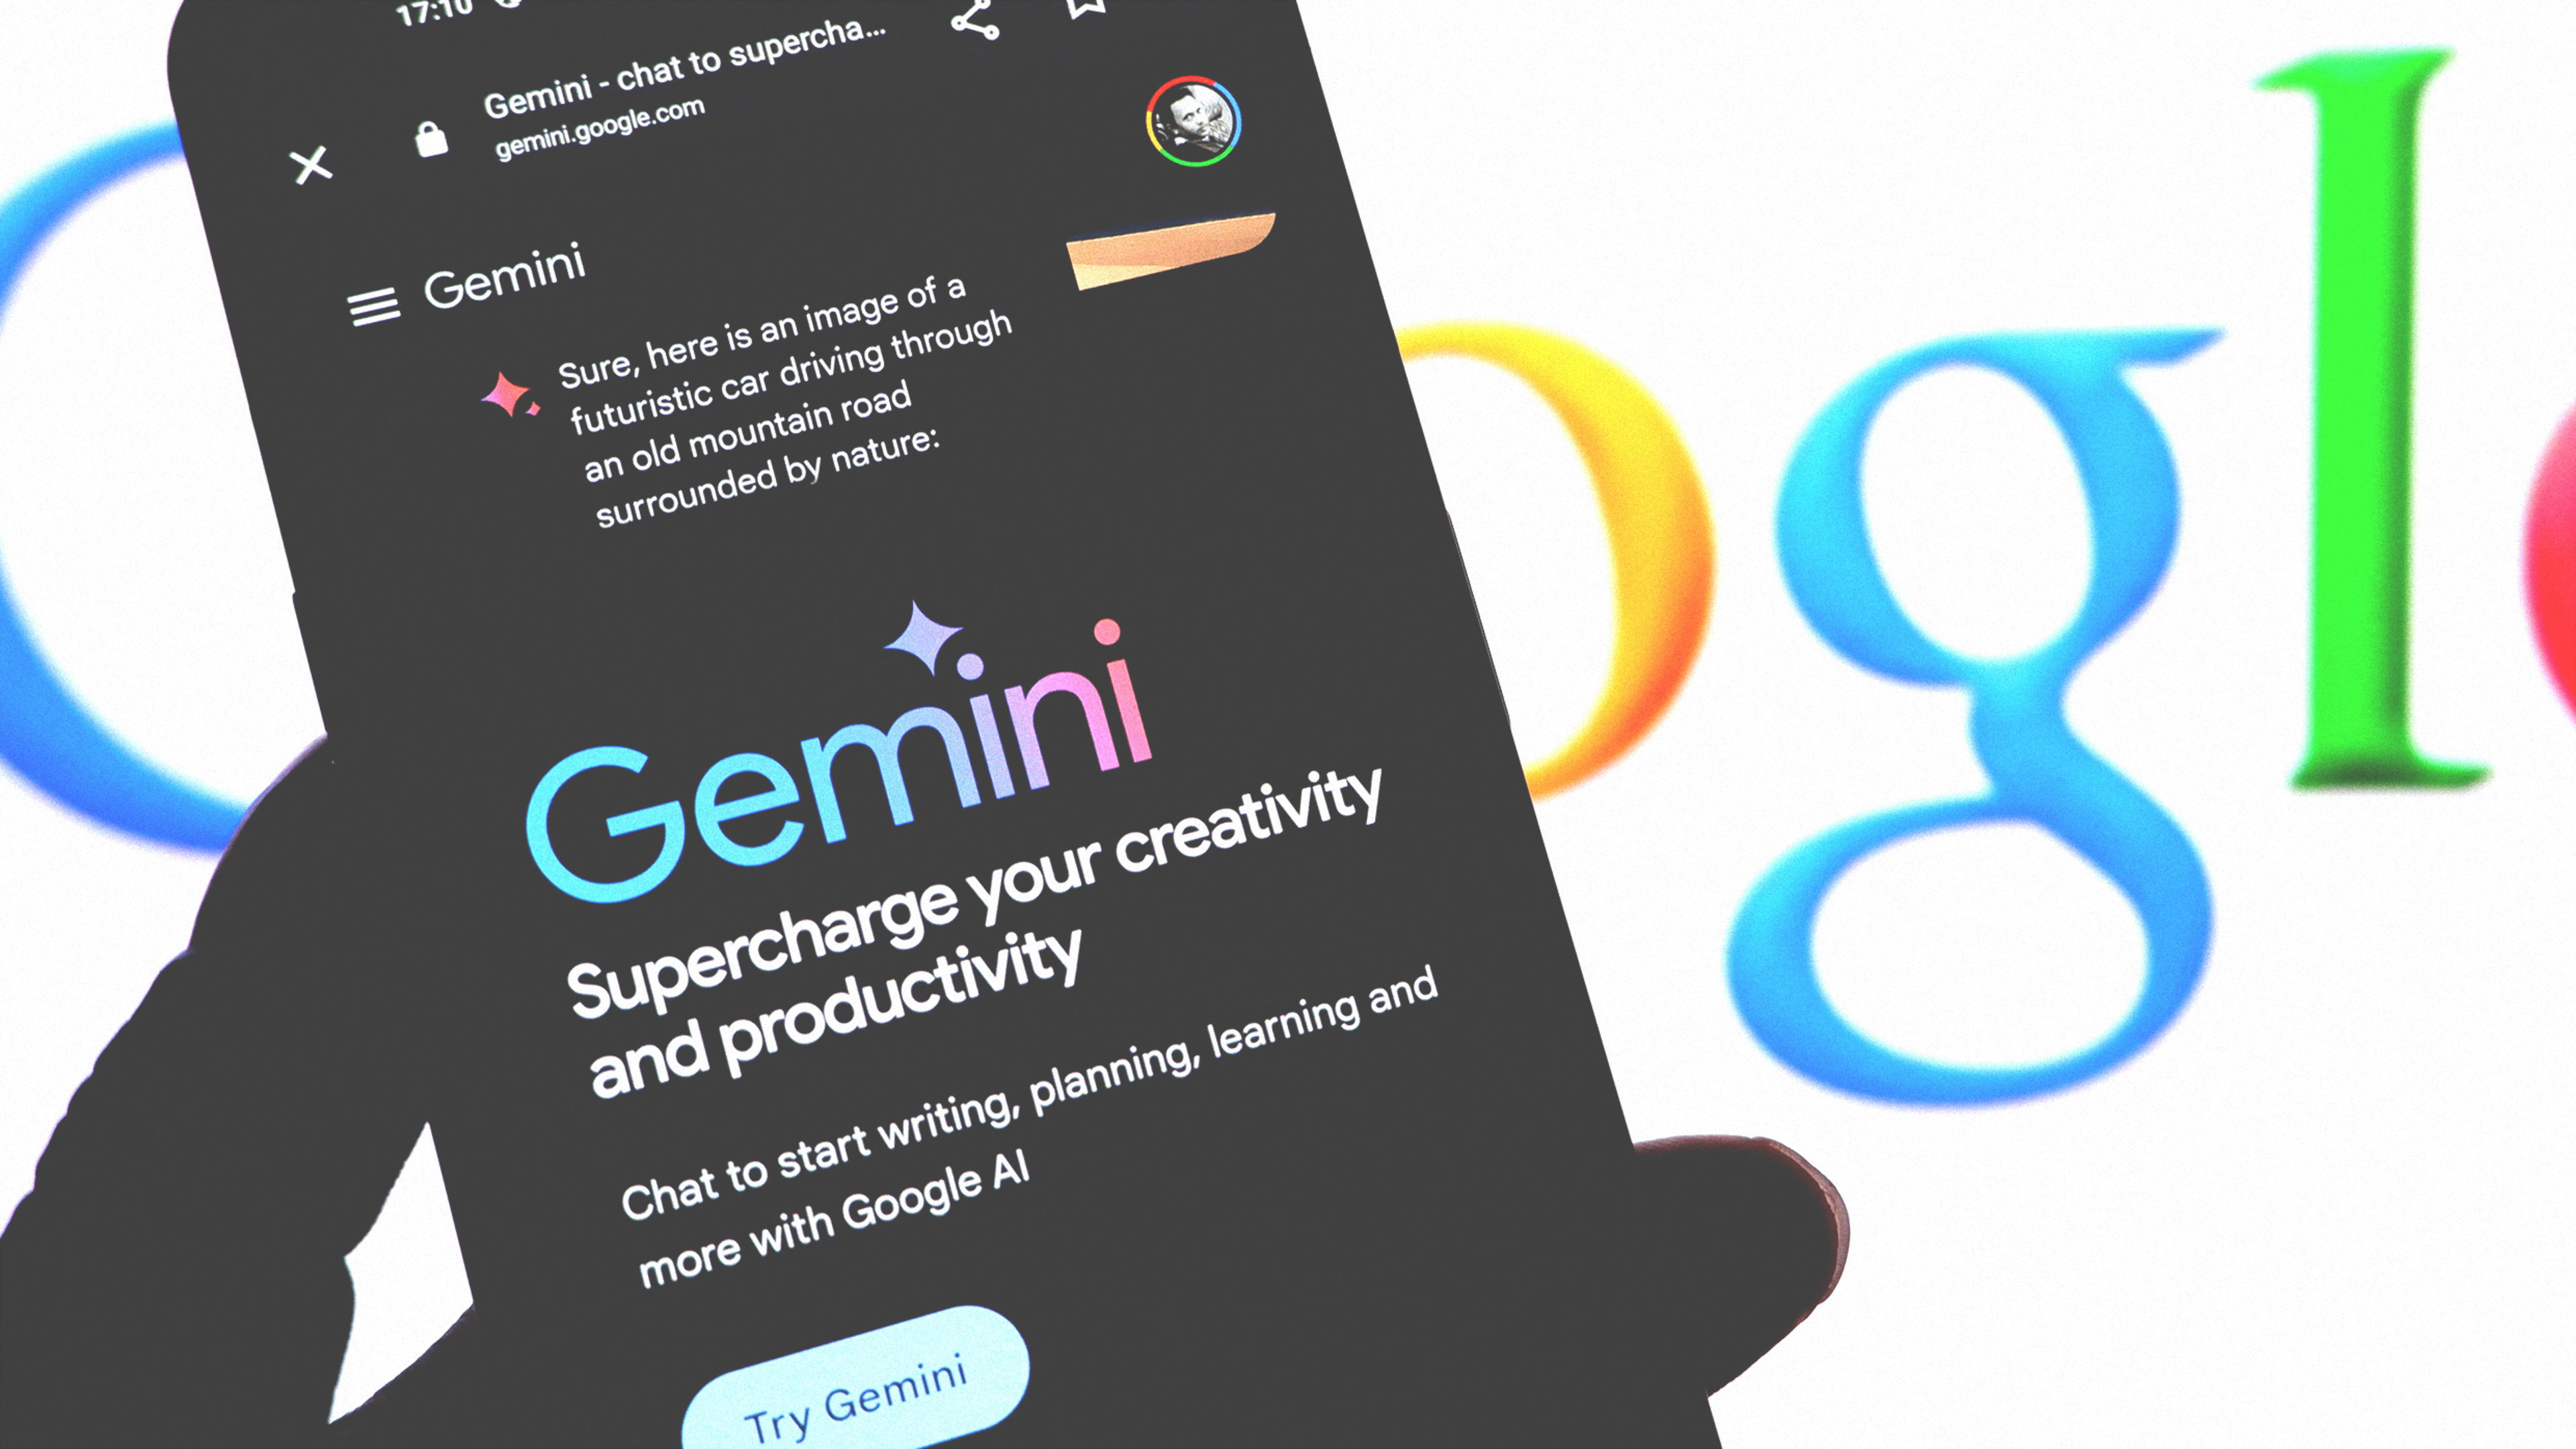 Google’s Gemini AI was mocked for its revisionist history, but it still highlights a real problem